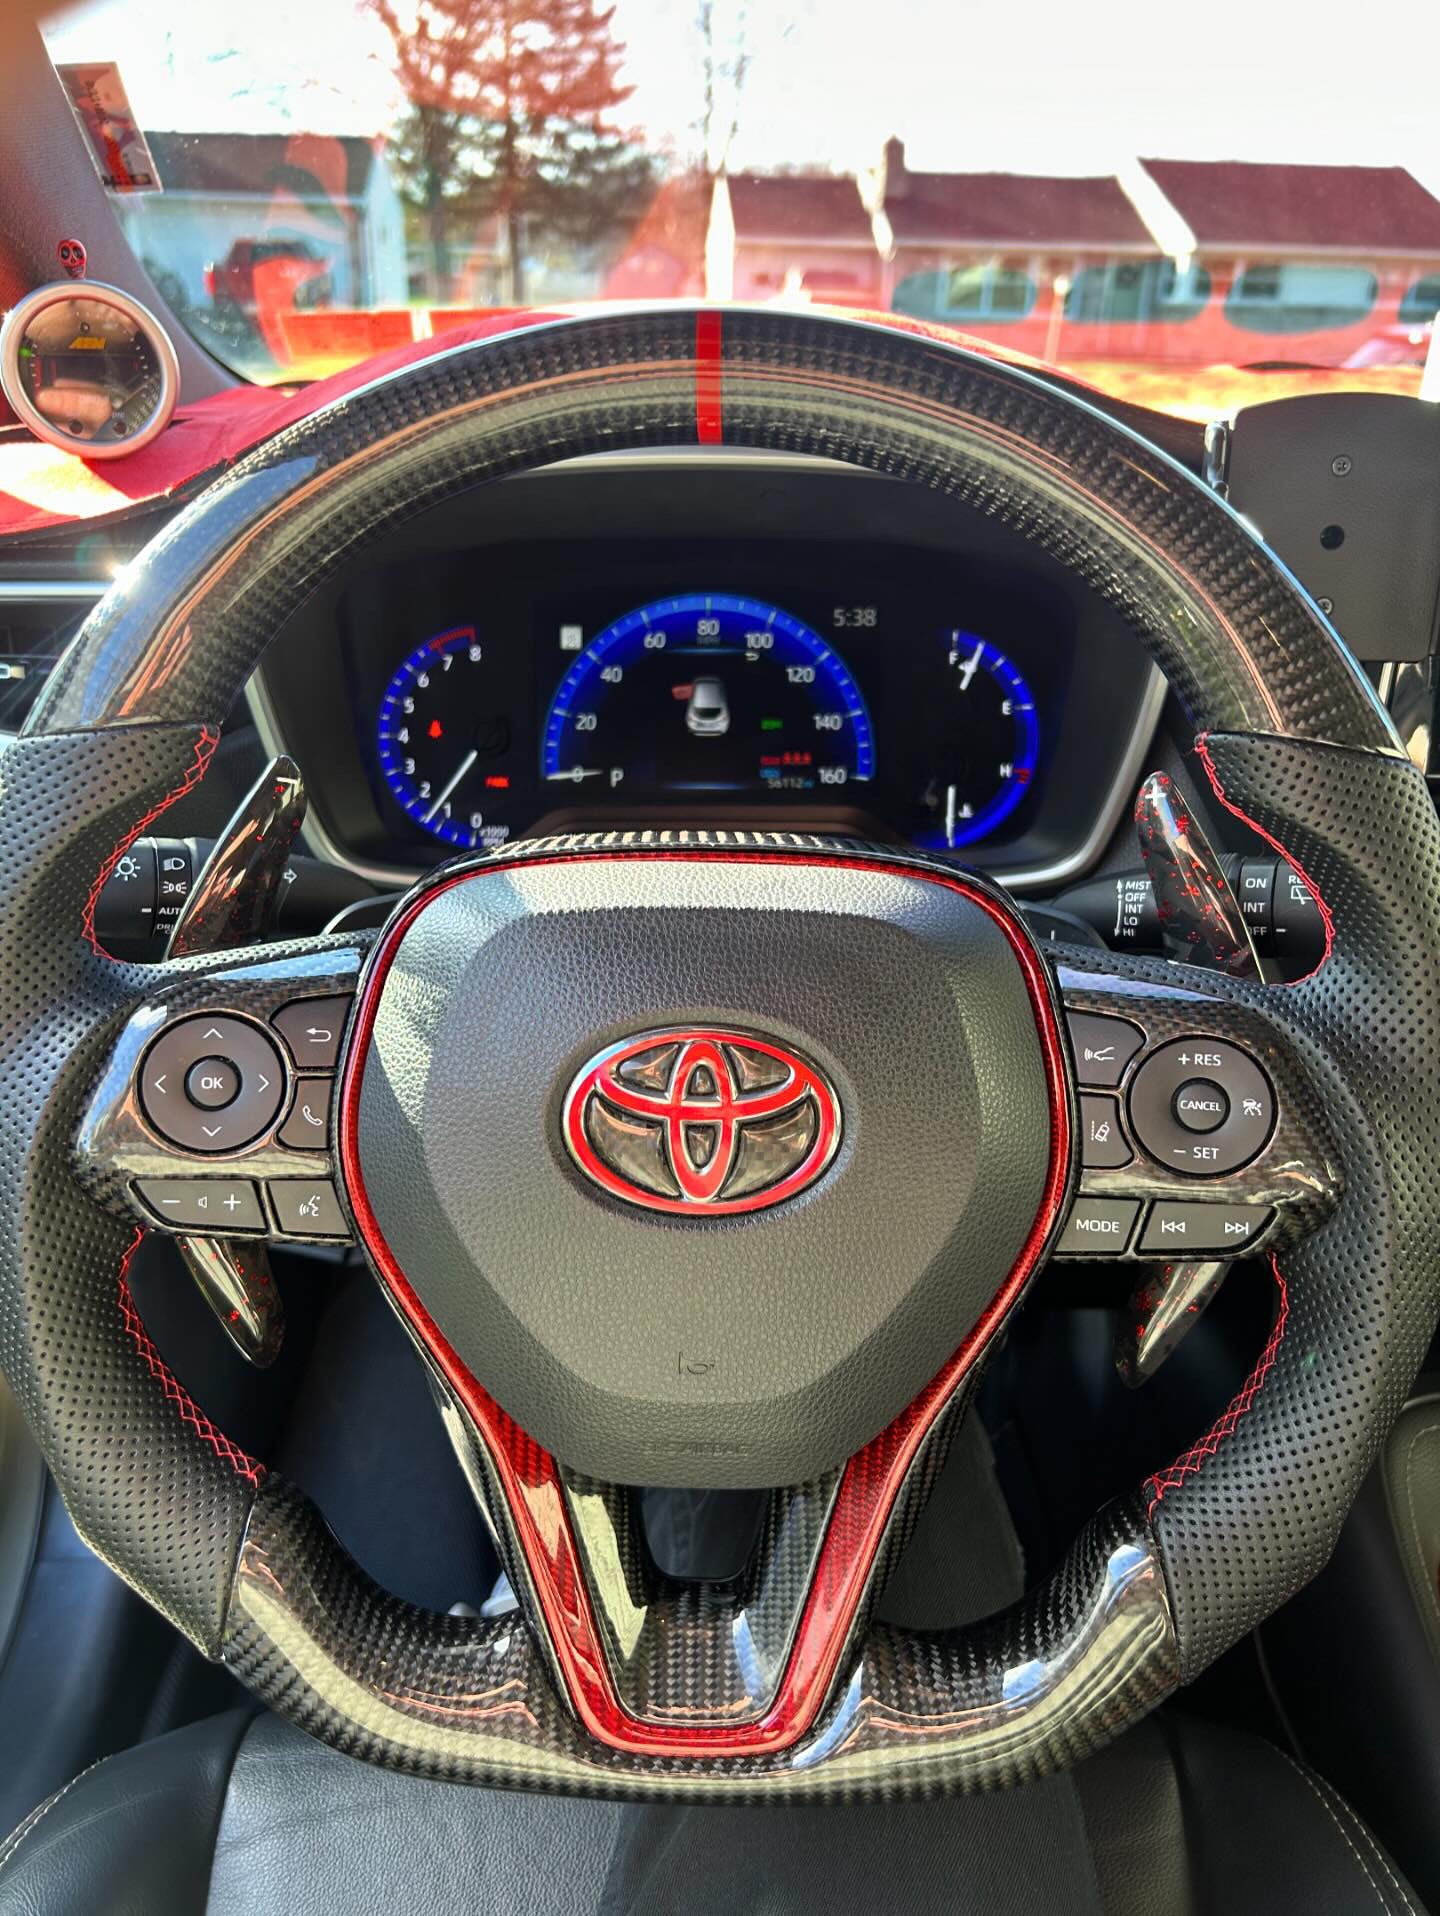 Paddle Shifters Carbon Fiber Compatible w/ Toyota Camry, Corolla, Avalon, Rav4 2018+  - VIP Price Free Shipping Item